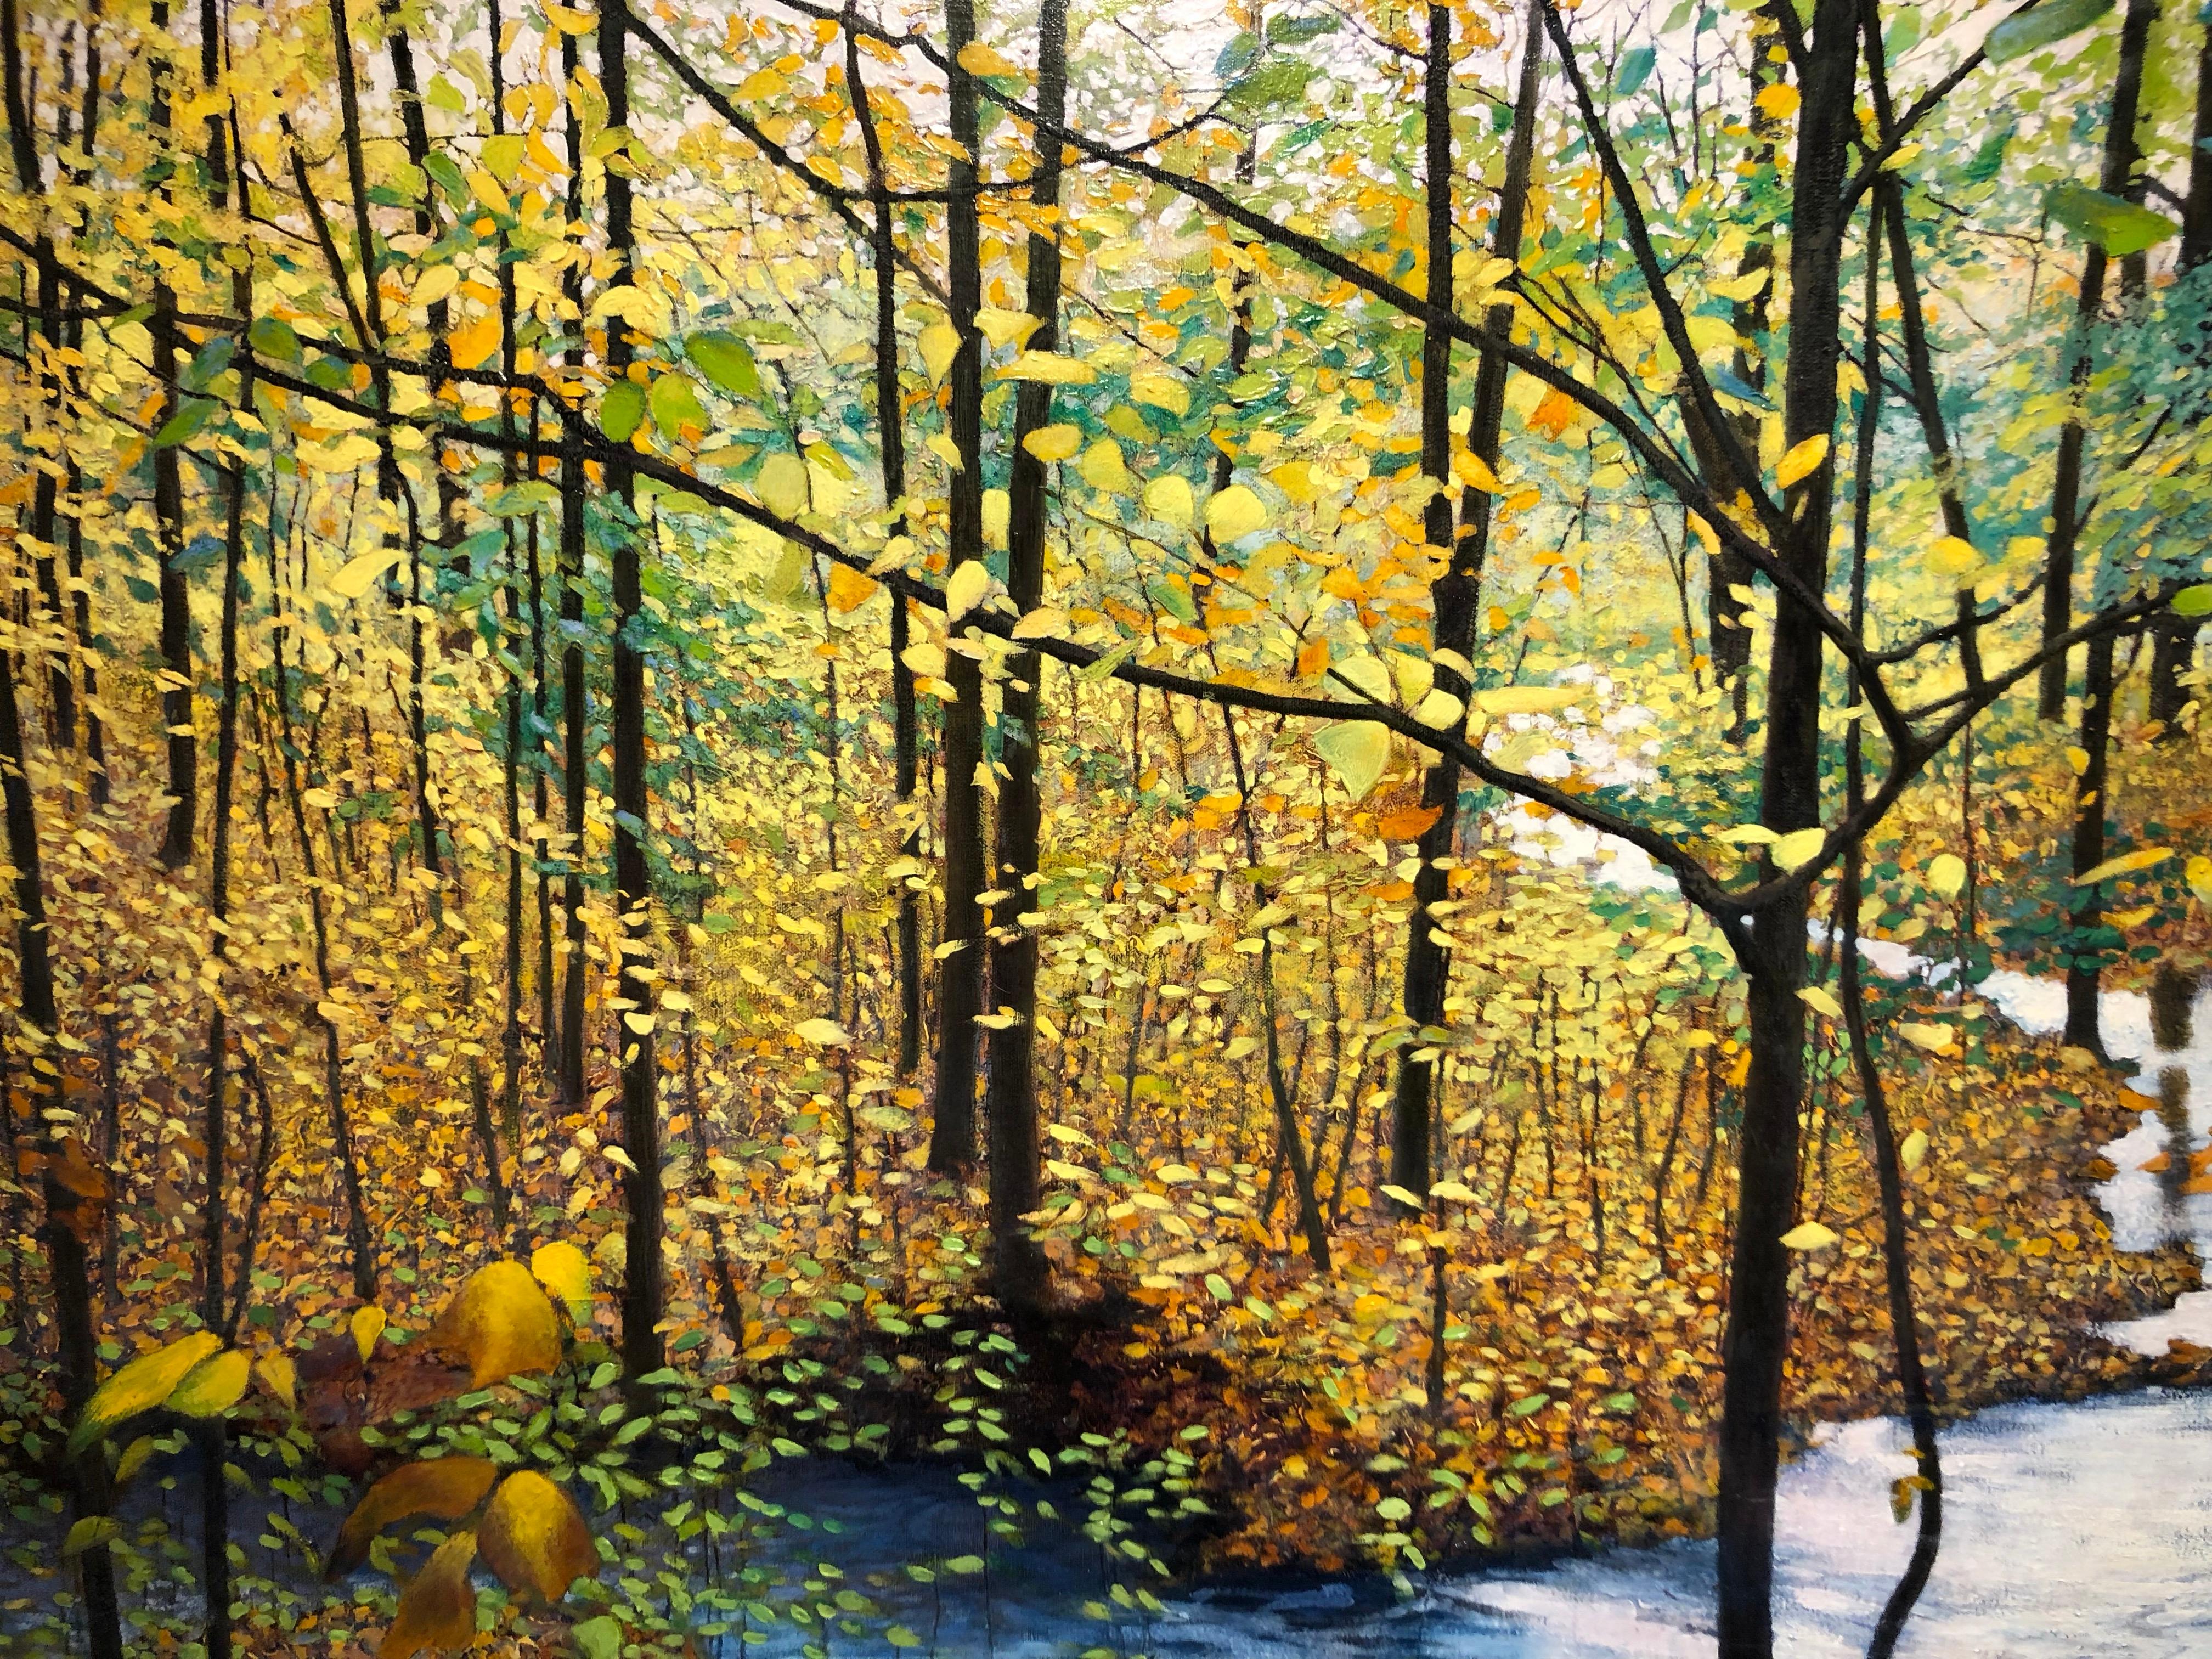 The Turning - Original Oil Painting of Stream and Trees with Leaf Covered Forest 5